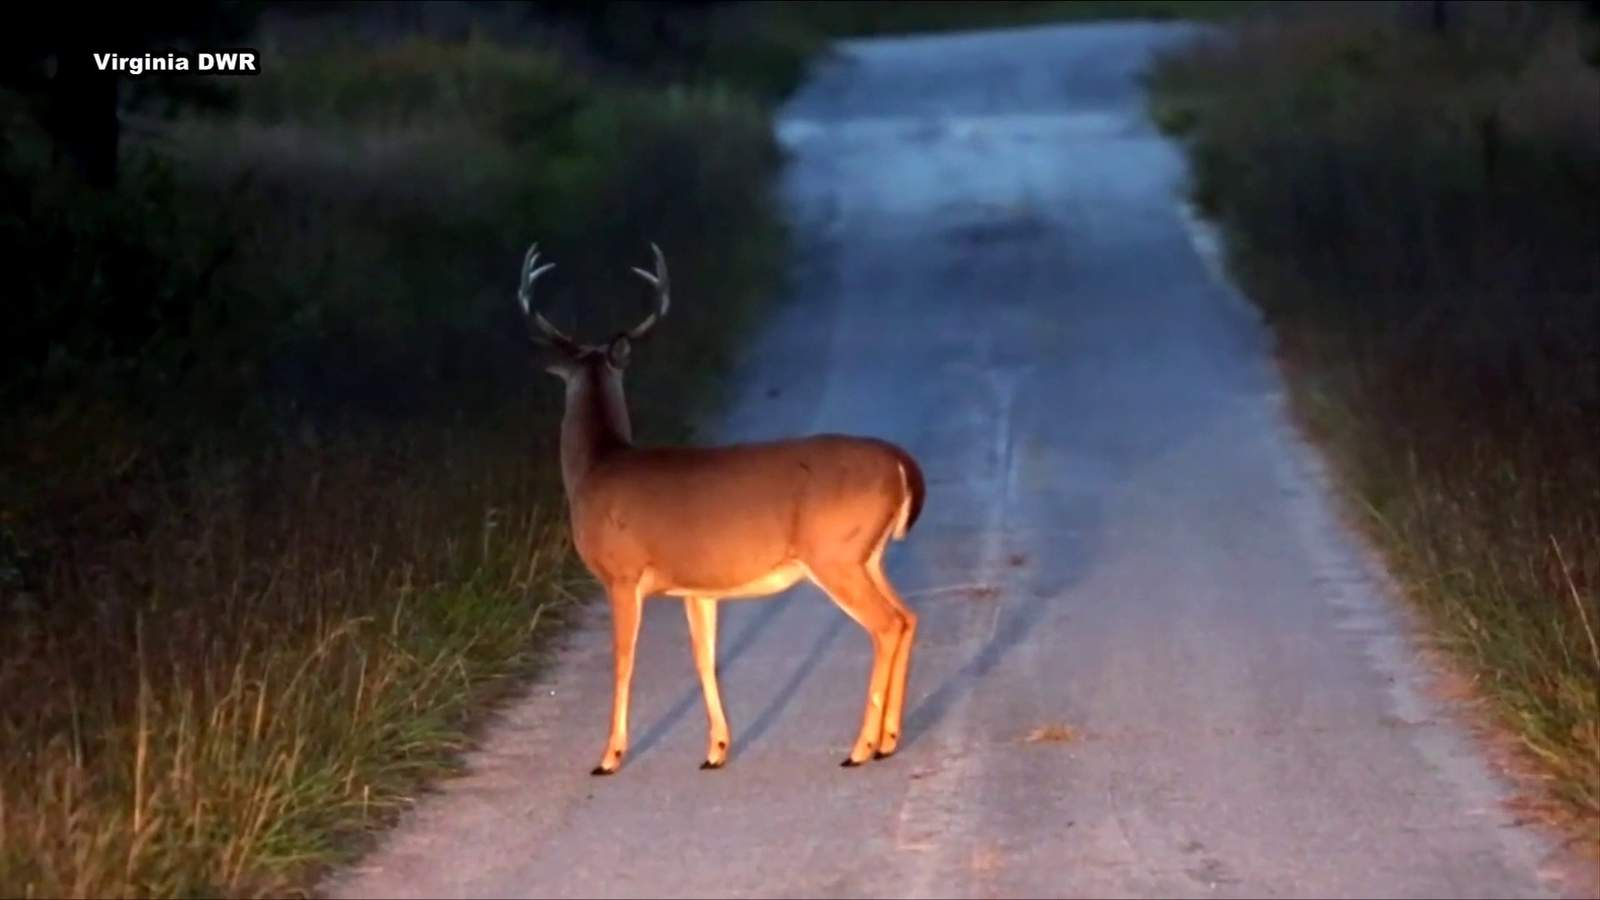 Don’t swerve: Officials urge Roanoke County drivers to look out for deer